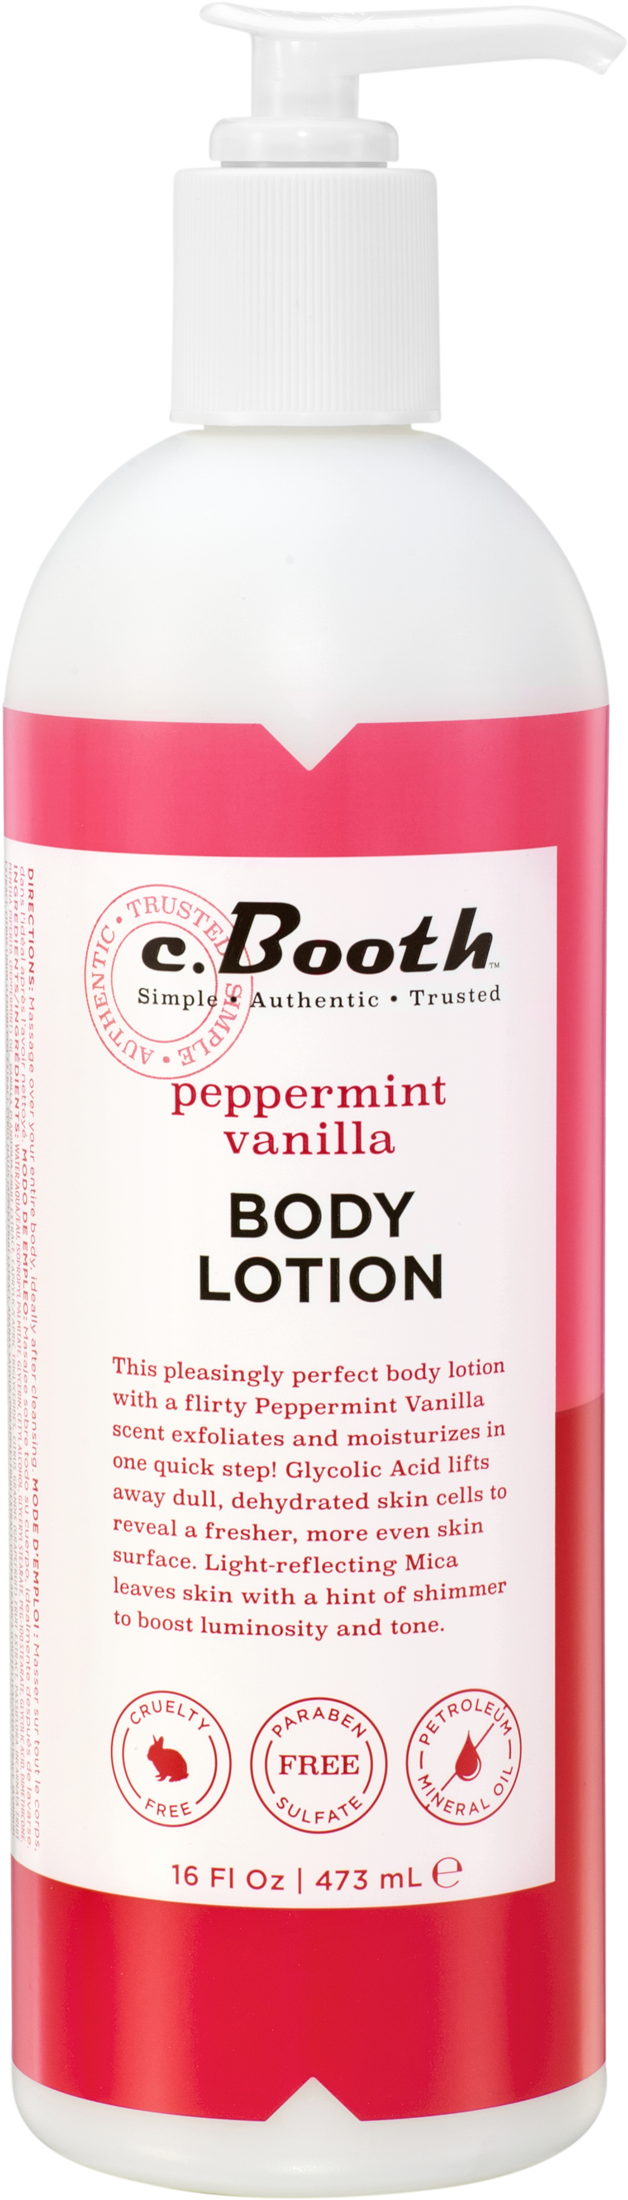 C. Booth Peppermint Vanilla Body Lotion